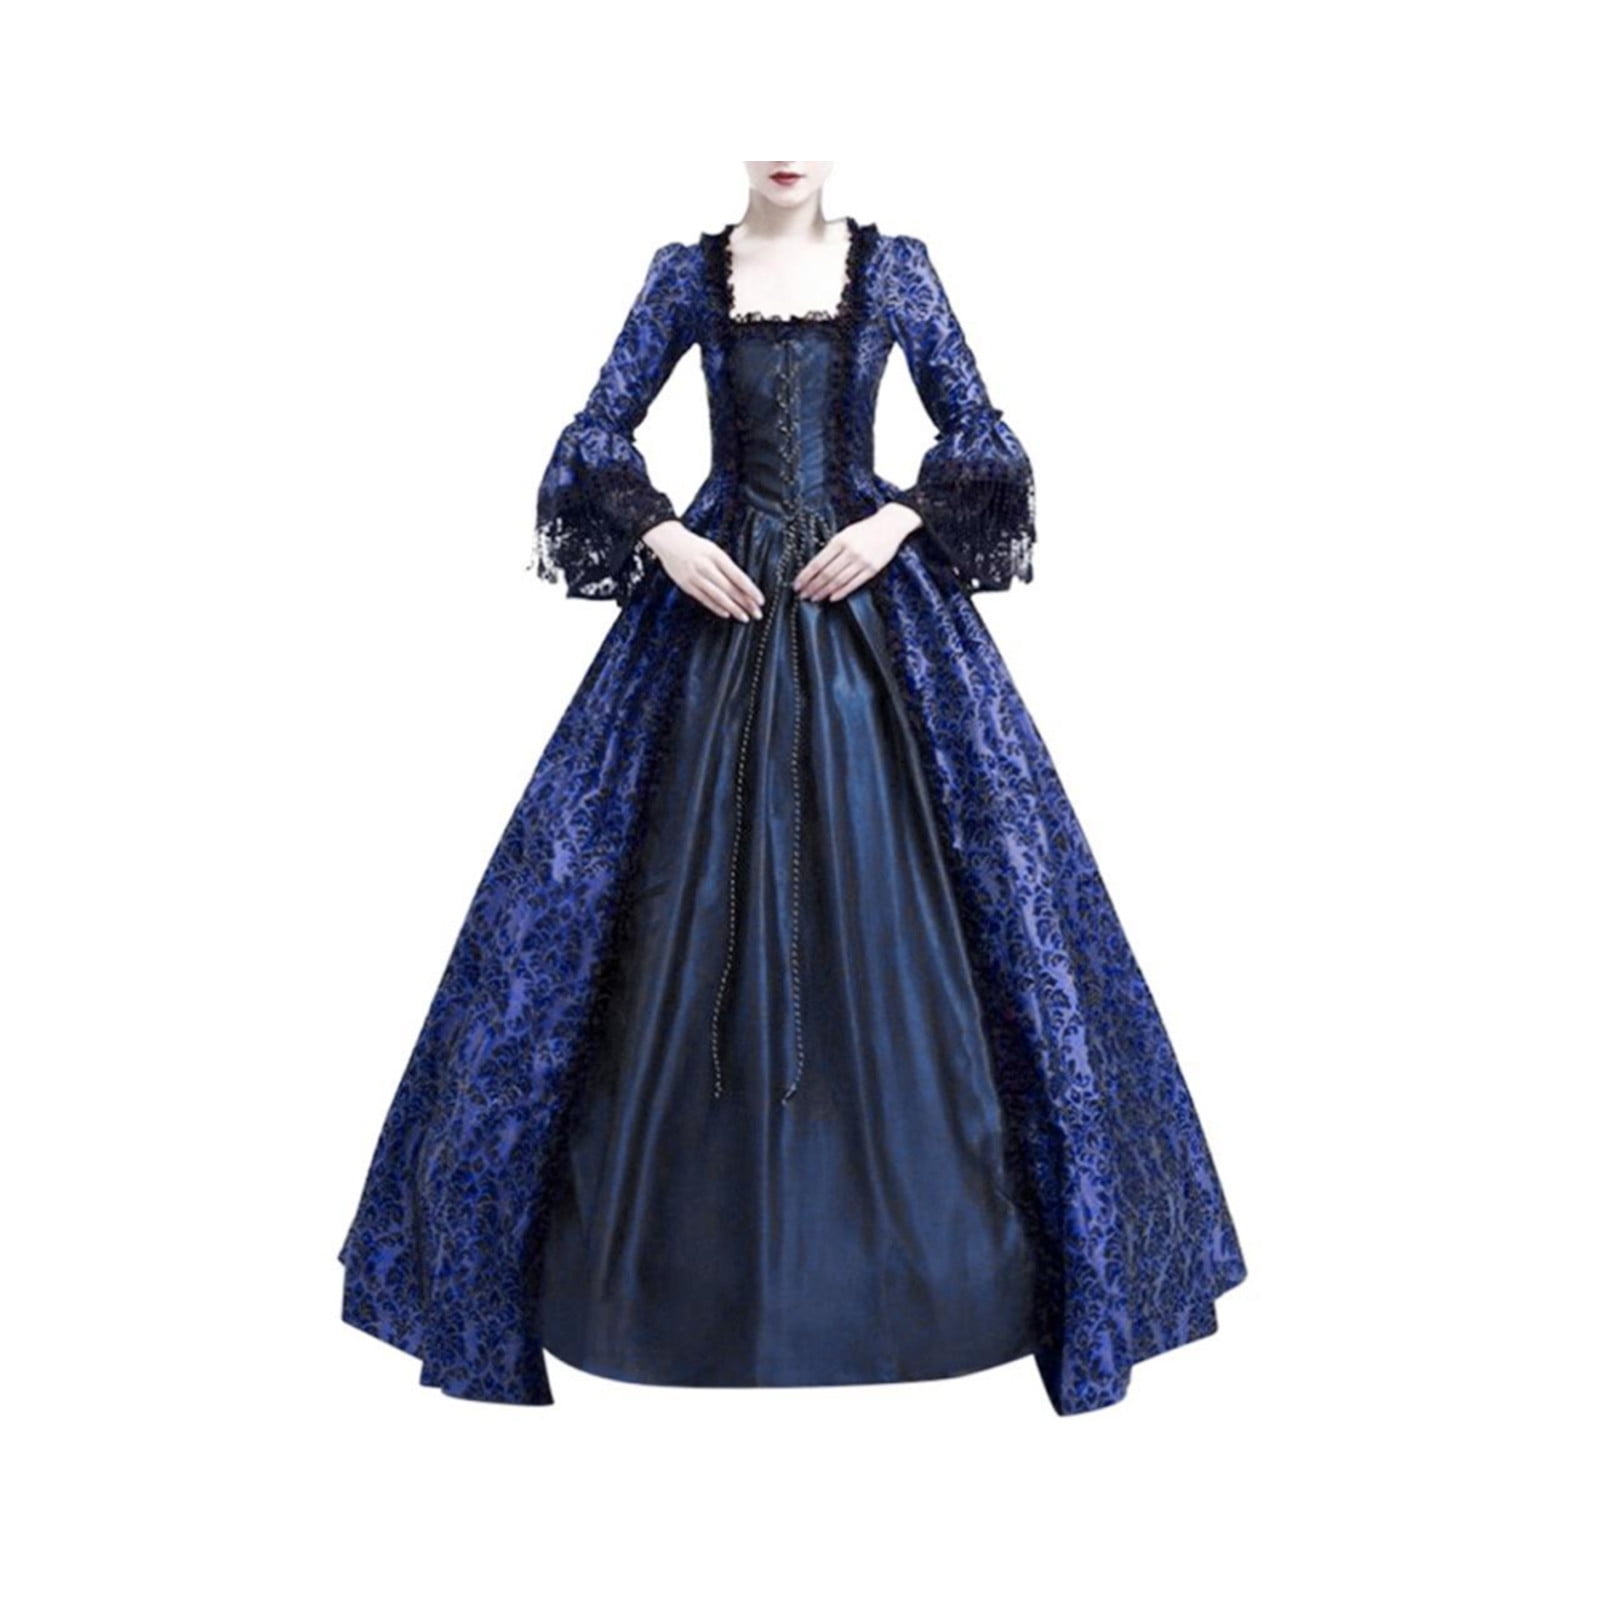 Women's Medieval Regency Costumes Gothic Renaissance Costume Royal Maxi Dresses Plus Size 18th Century Cosplay Gown 